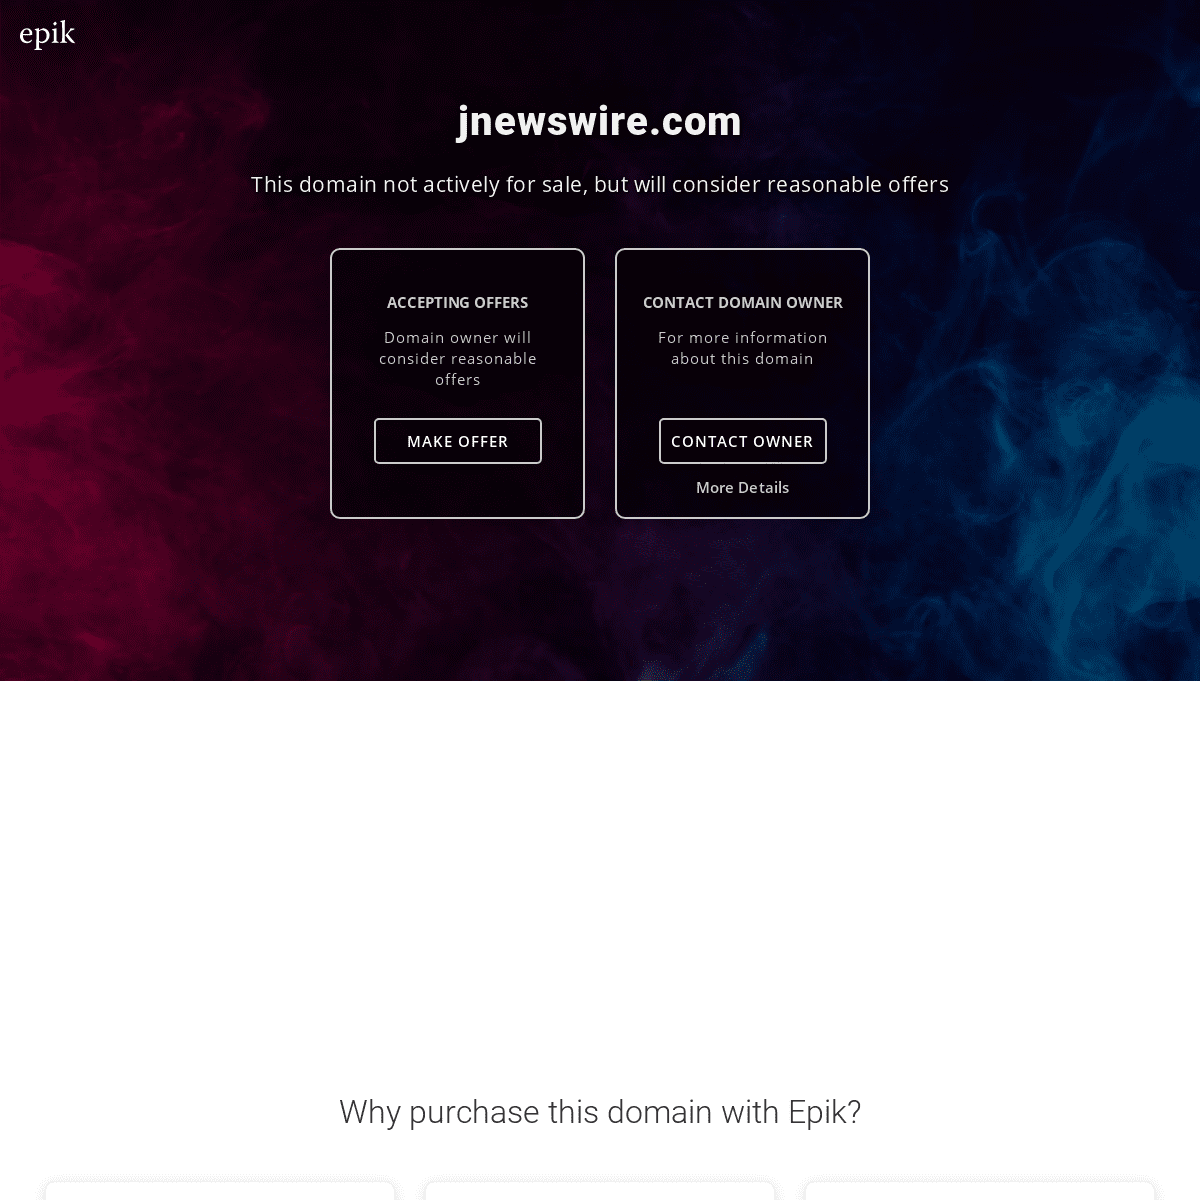 A complete backup of https://jnewswire.com